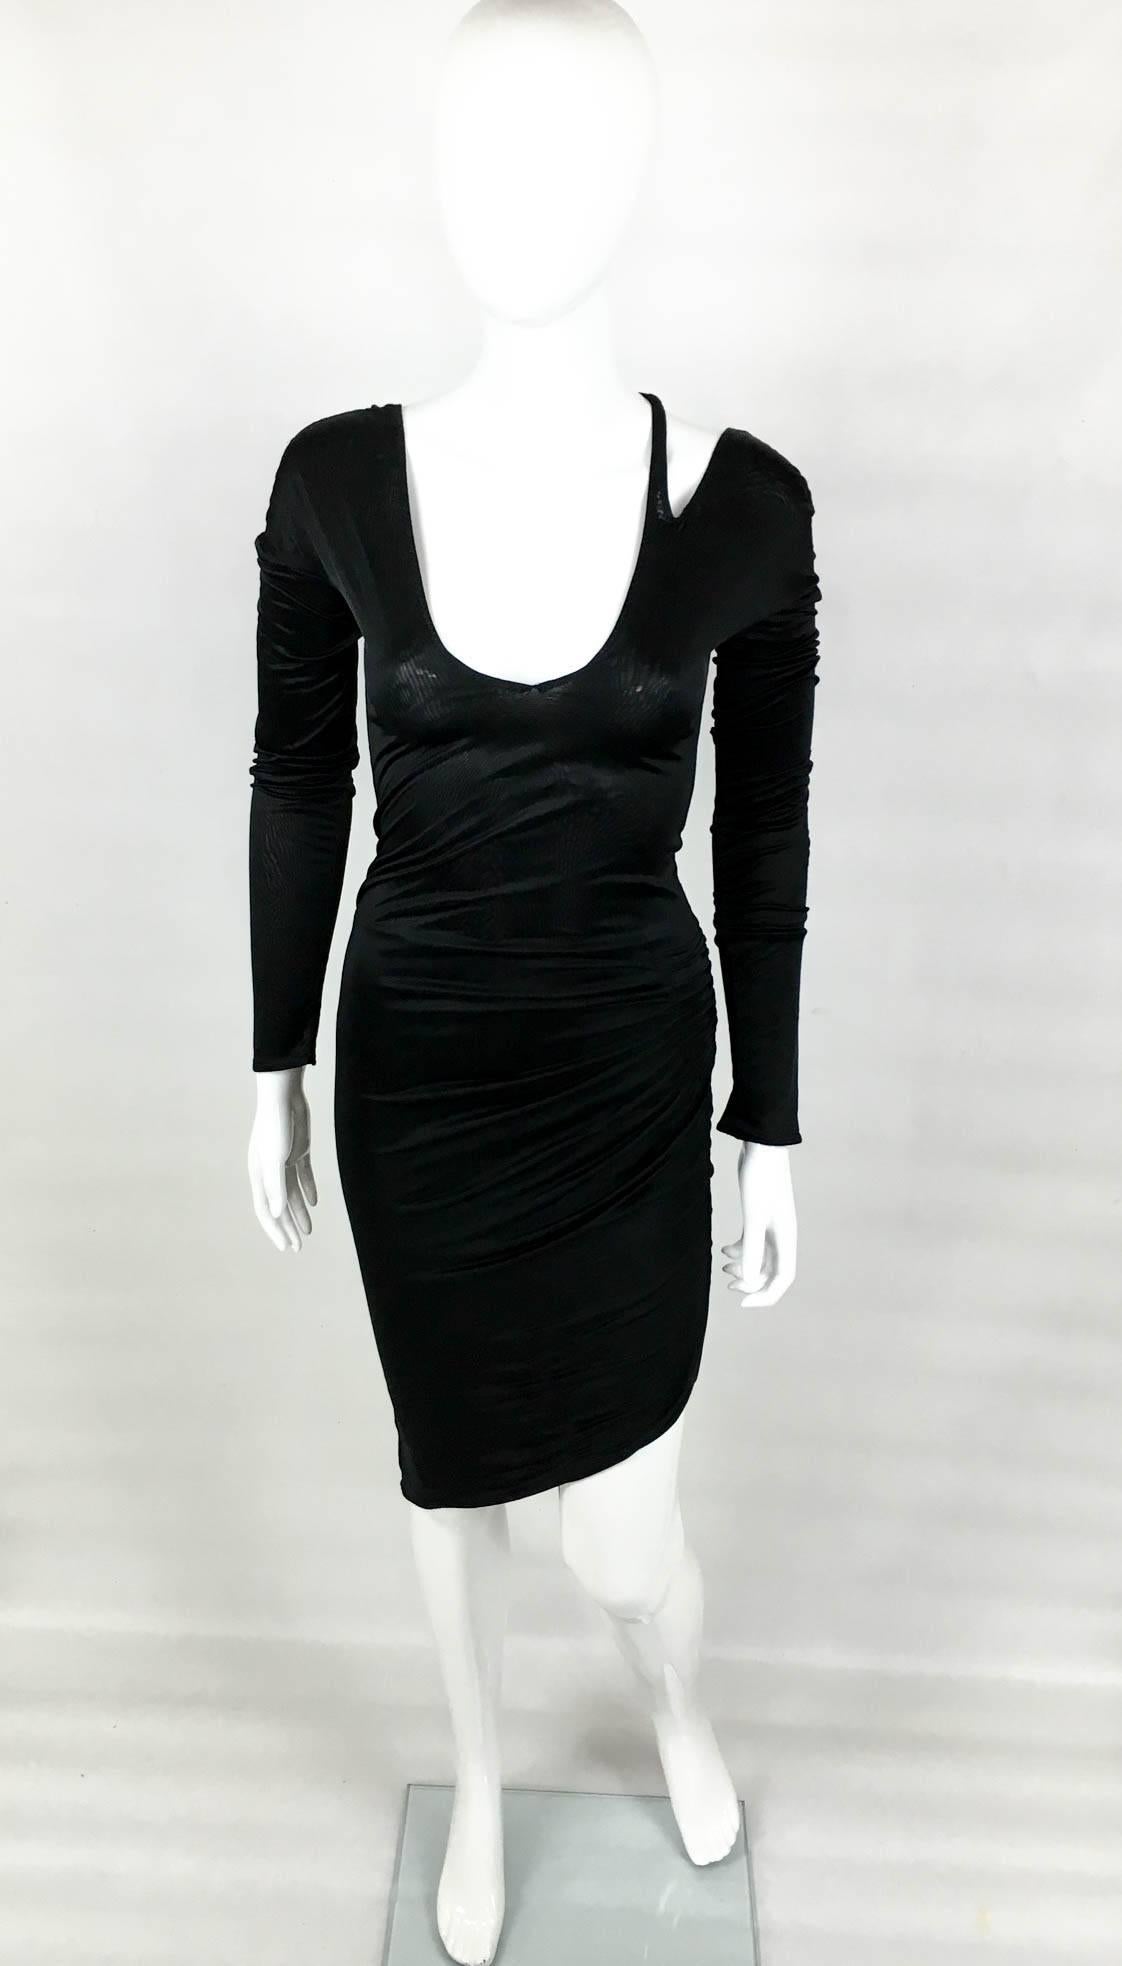 Vintage Gucci by Tom Ford asymmetrical long sleeve dress. This super sexy Gucci dress epitomises the Tom Ford’s reign in the fashion powerhouse – the chic femme fatalle. The neckline is low, front and back, and it features a strap detail connecting